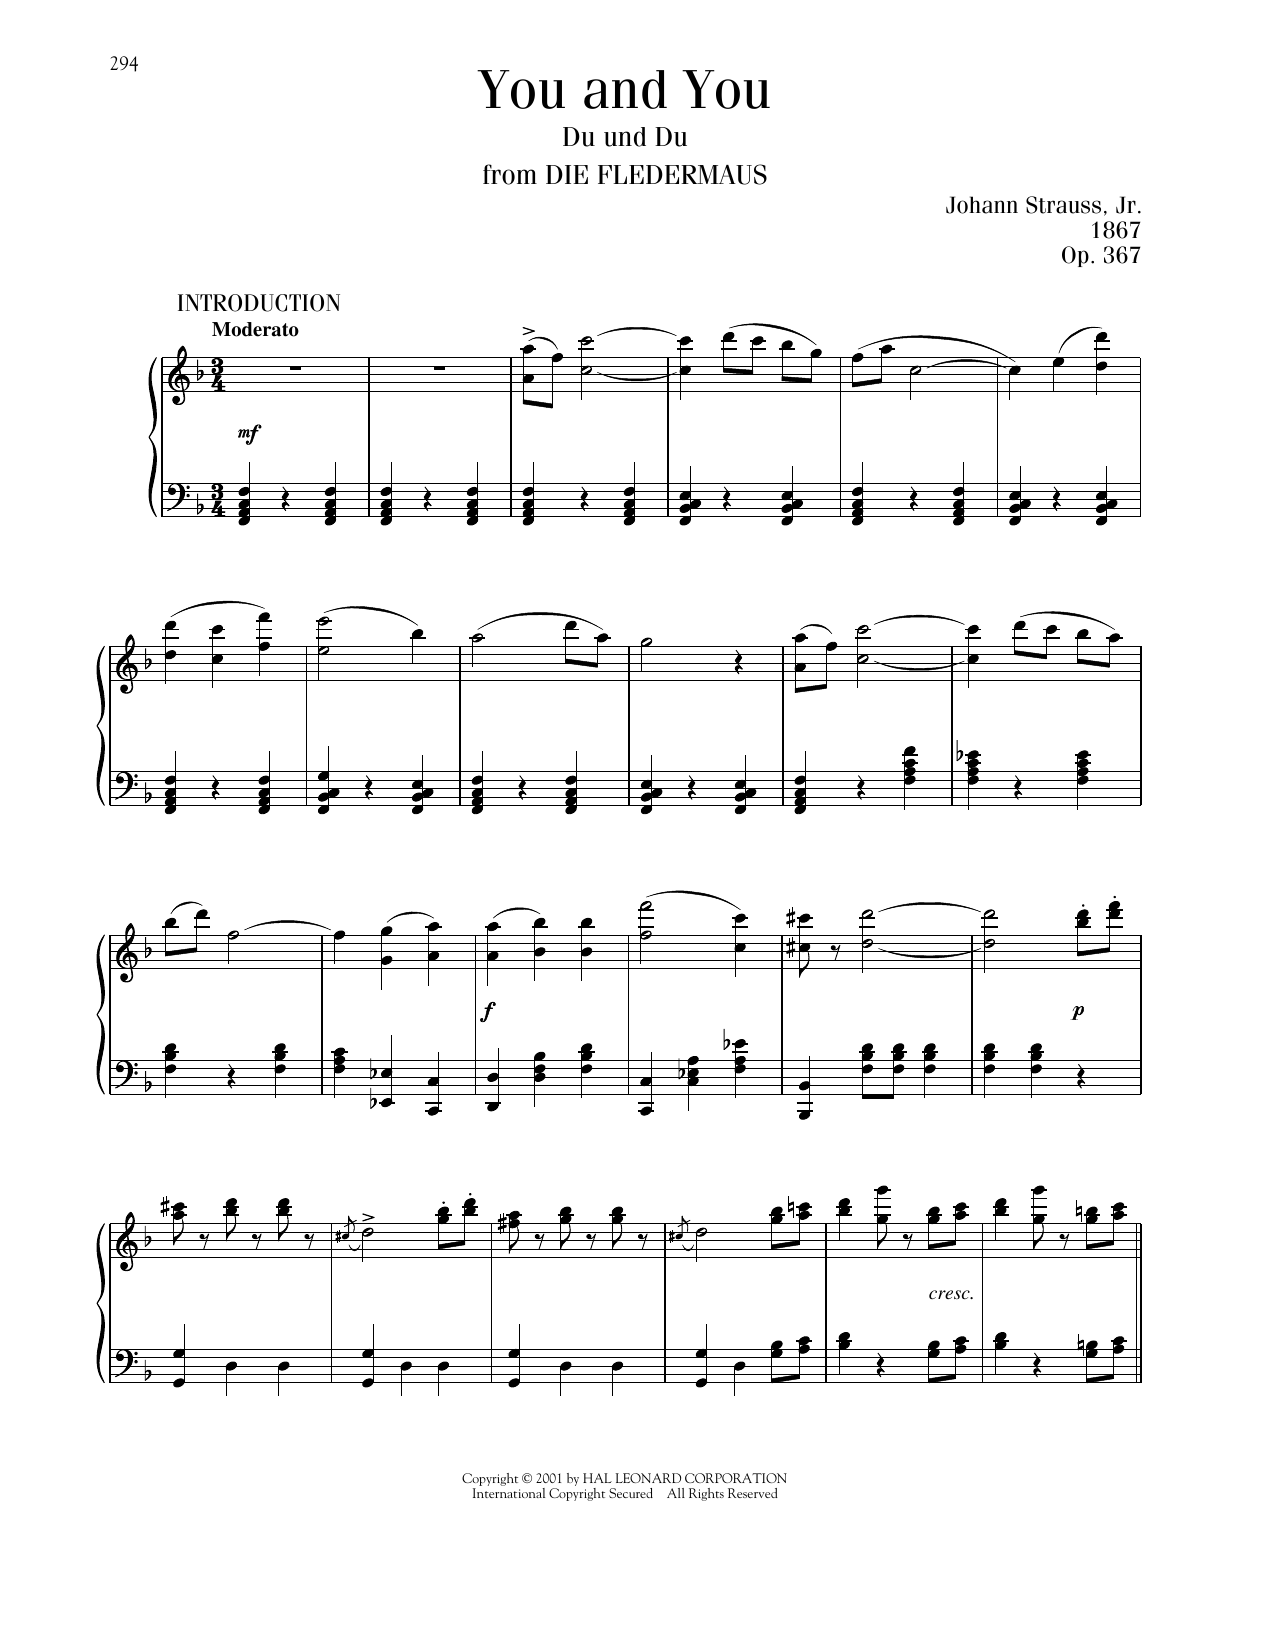 Johann Strauss You And You, Op. 367 sheet music notes printable PDF score